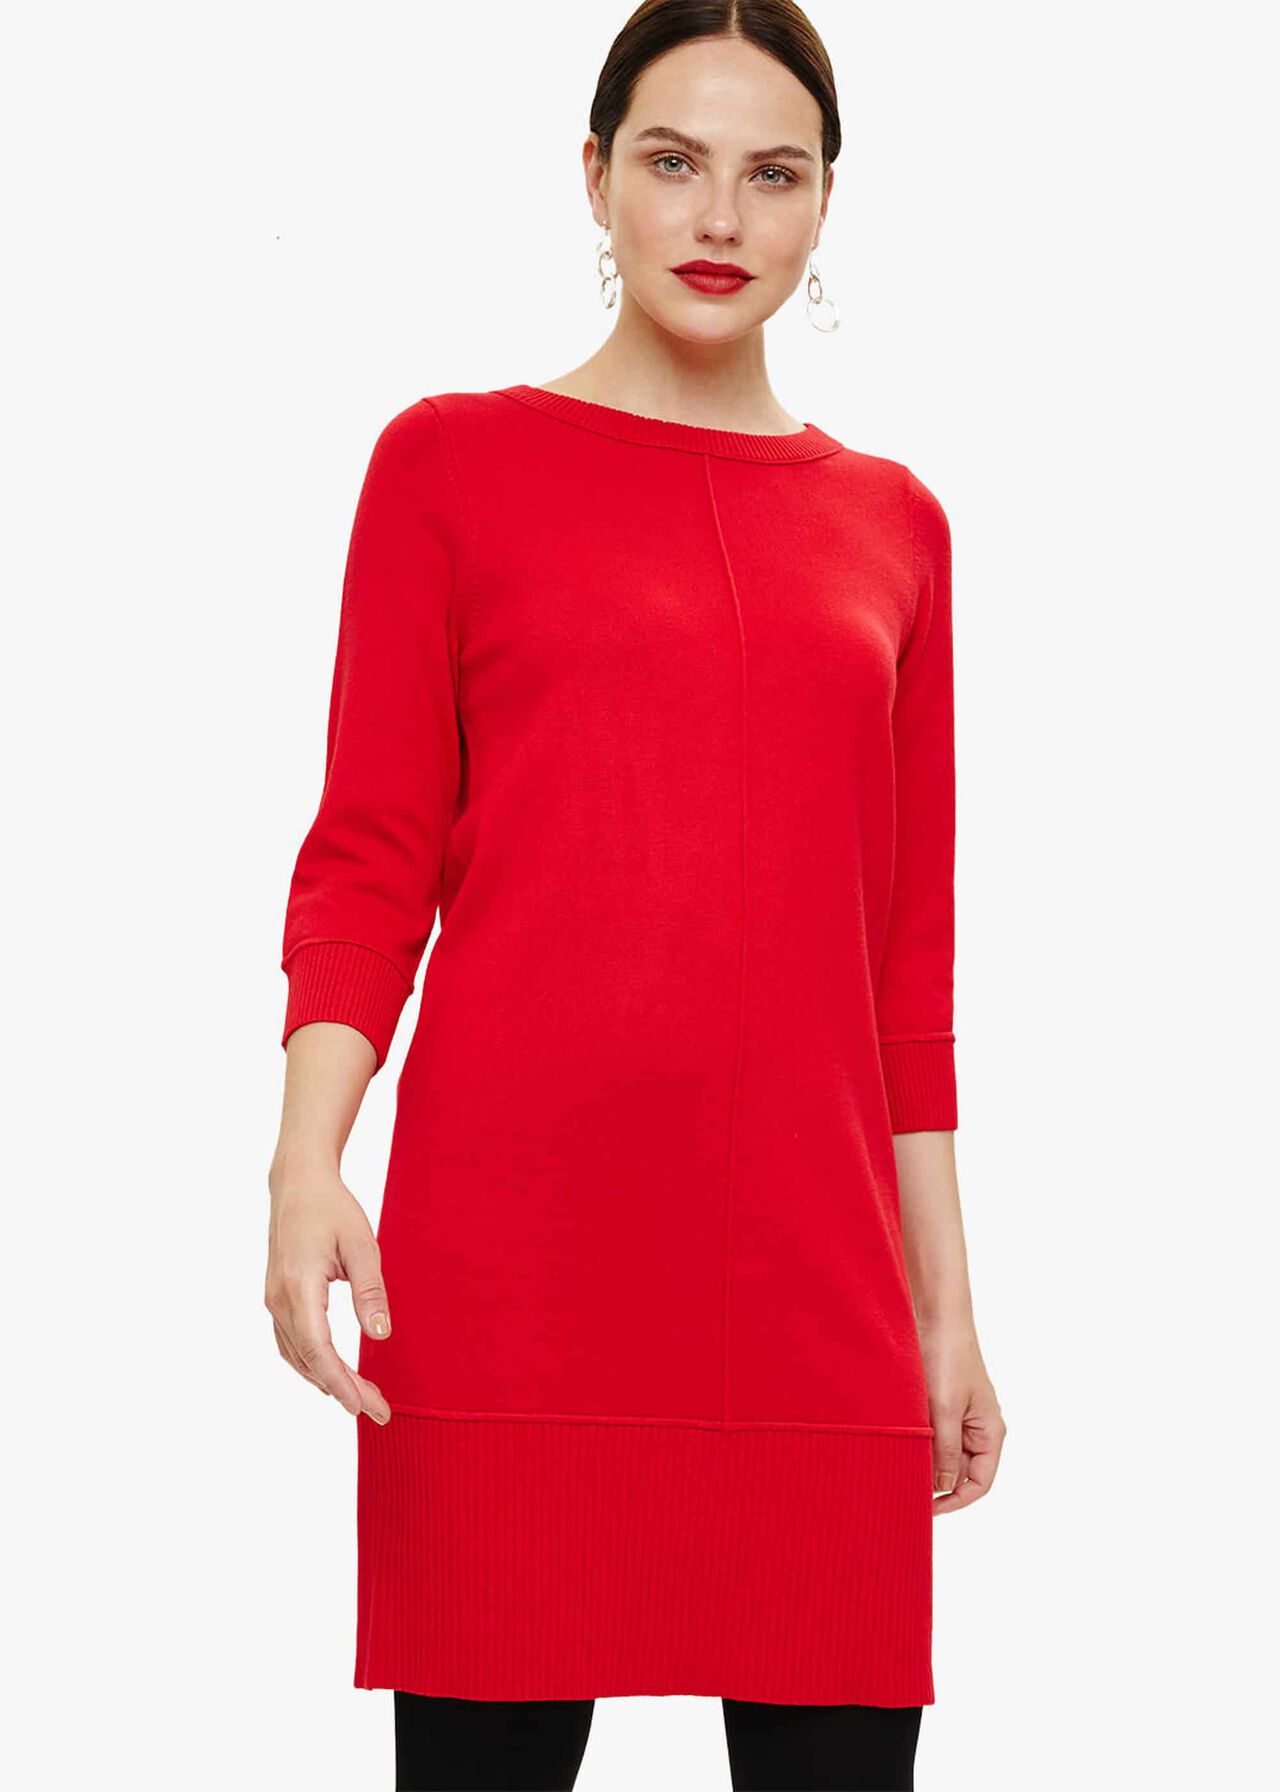 Shiloh Exposed Seam Knitted Dress